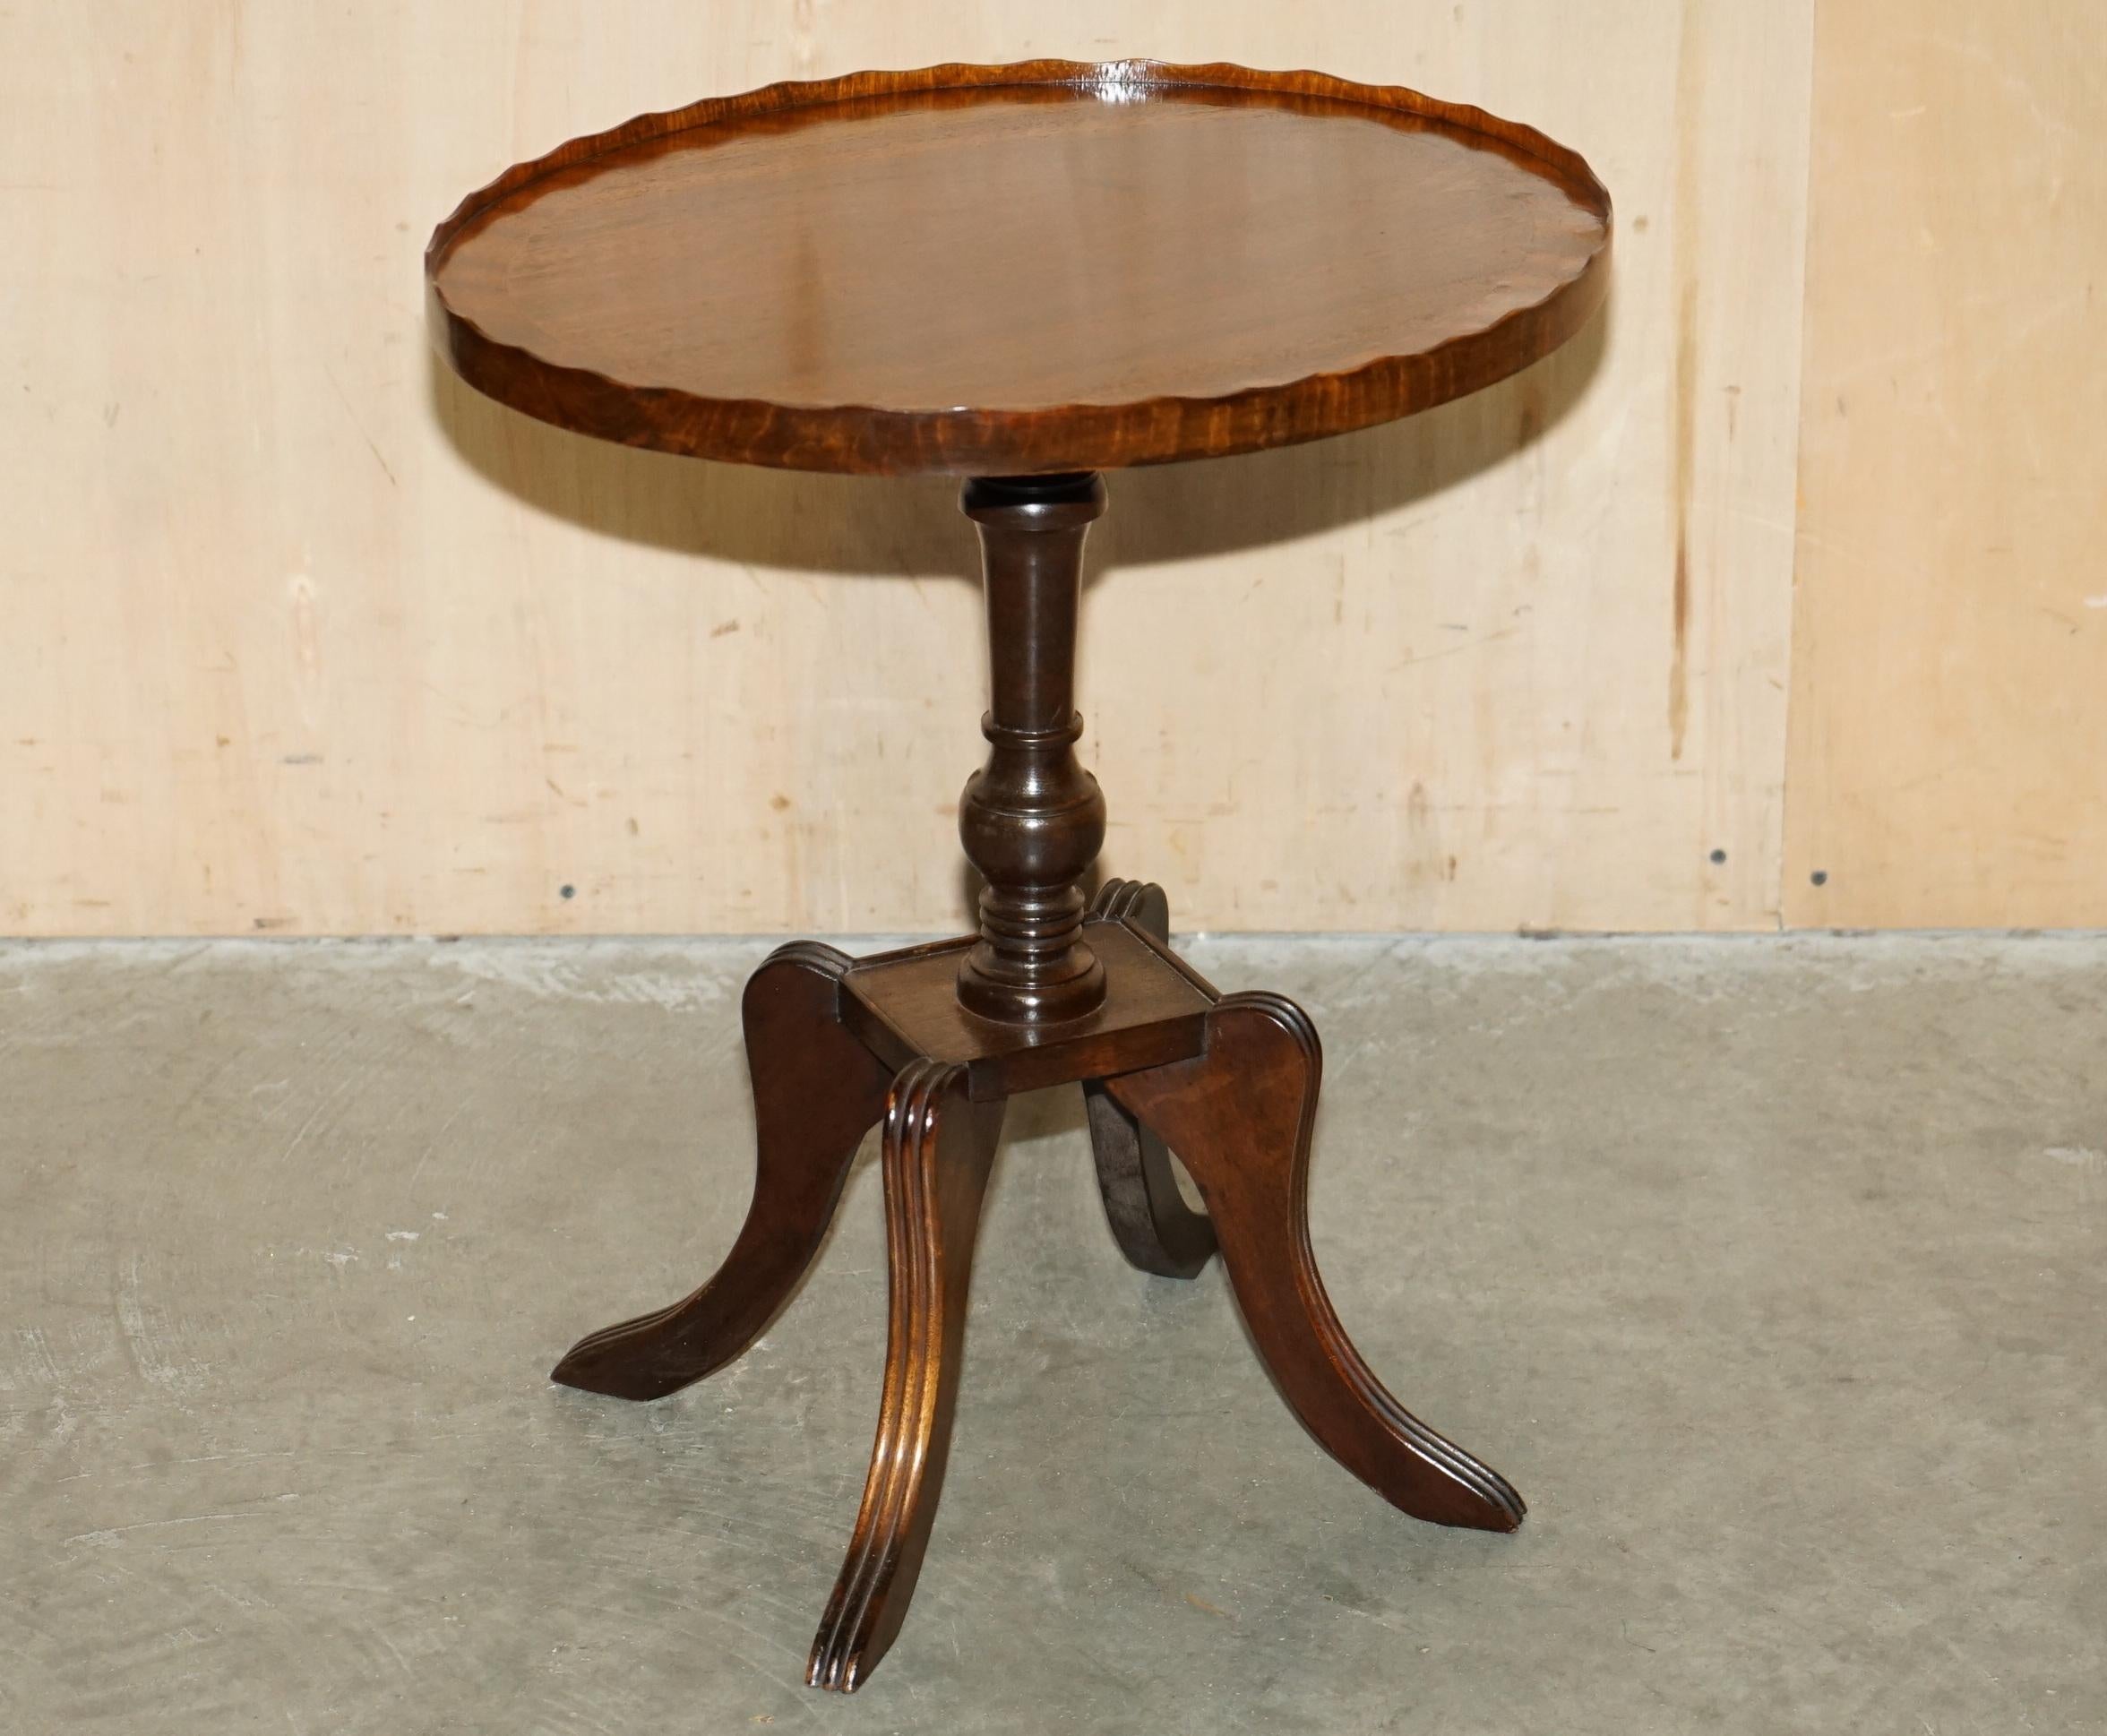 Royal House Antiques

Royal House Antiques is delighted to offer for sale this lovely, hand made in England, vintage Flamed Mahogany side table with gallery rail boarder that has been fully restored by my French polisher 

Please note the delivery